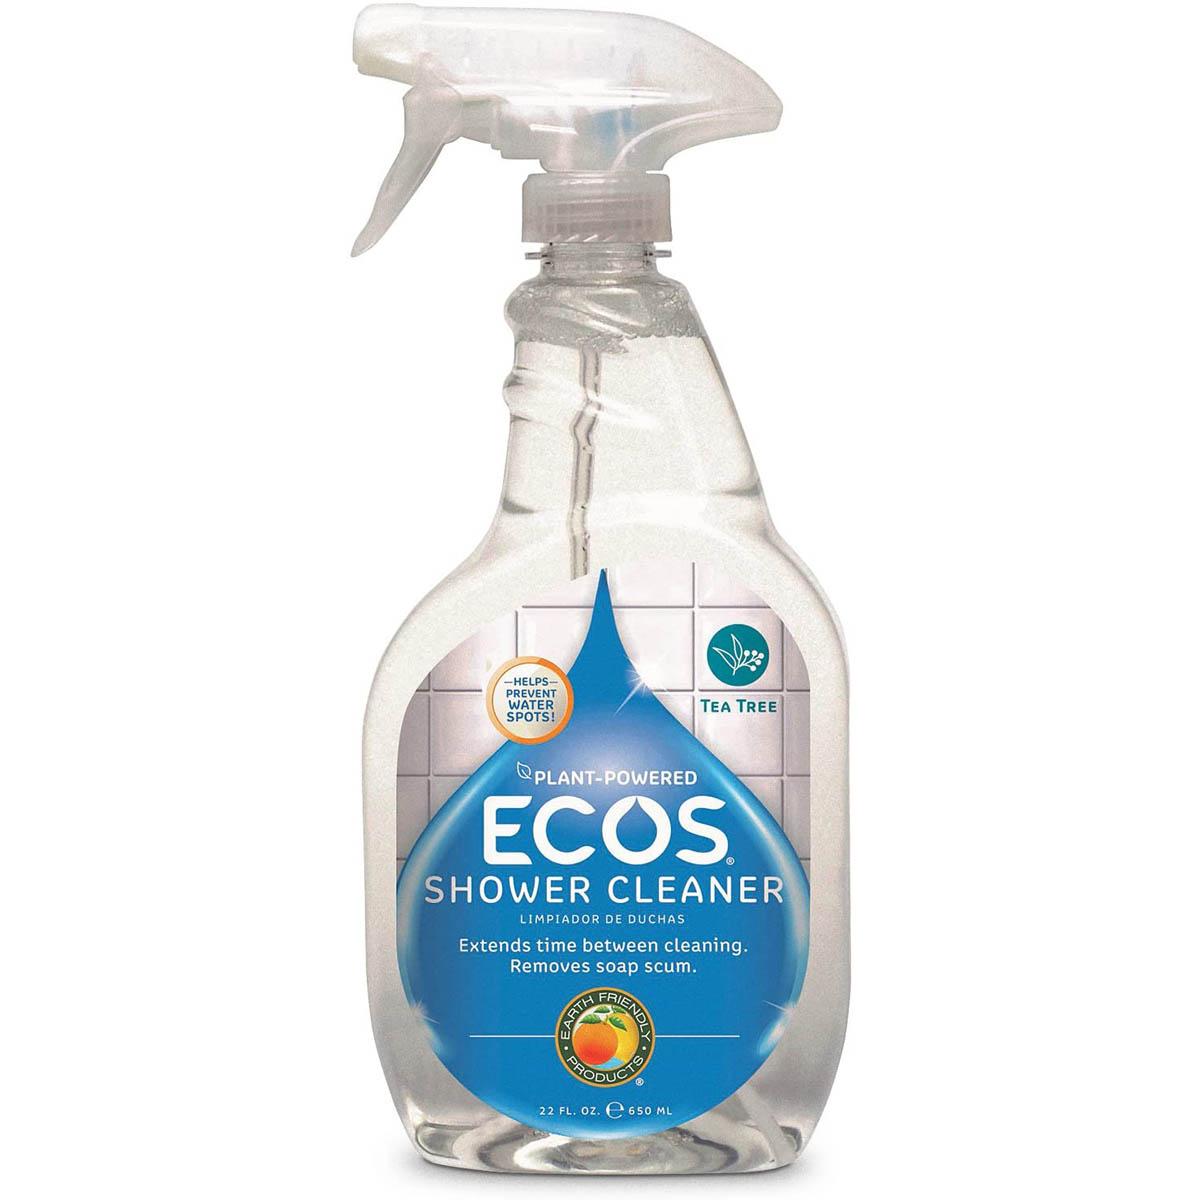 22oz ECOS Non-Toxic Shower Cleaner with Tea Tree Oil for $5.08